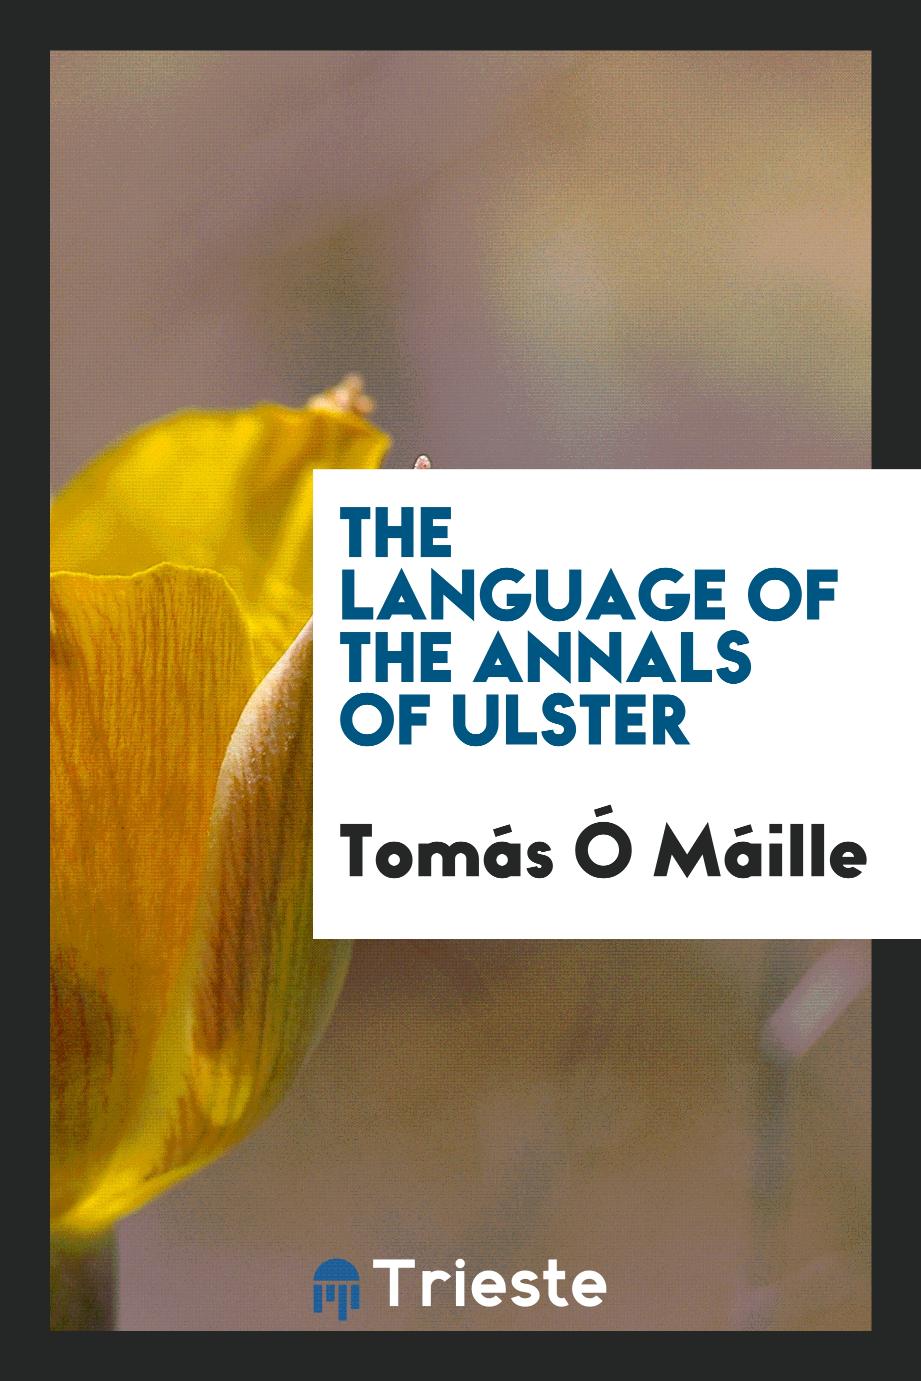 The language of the annals of Ulster